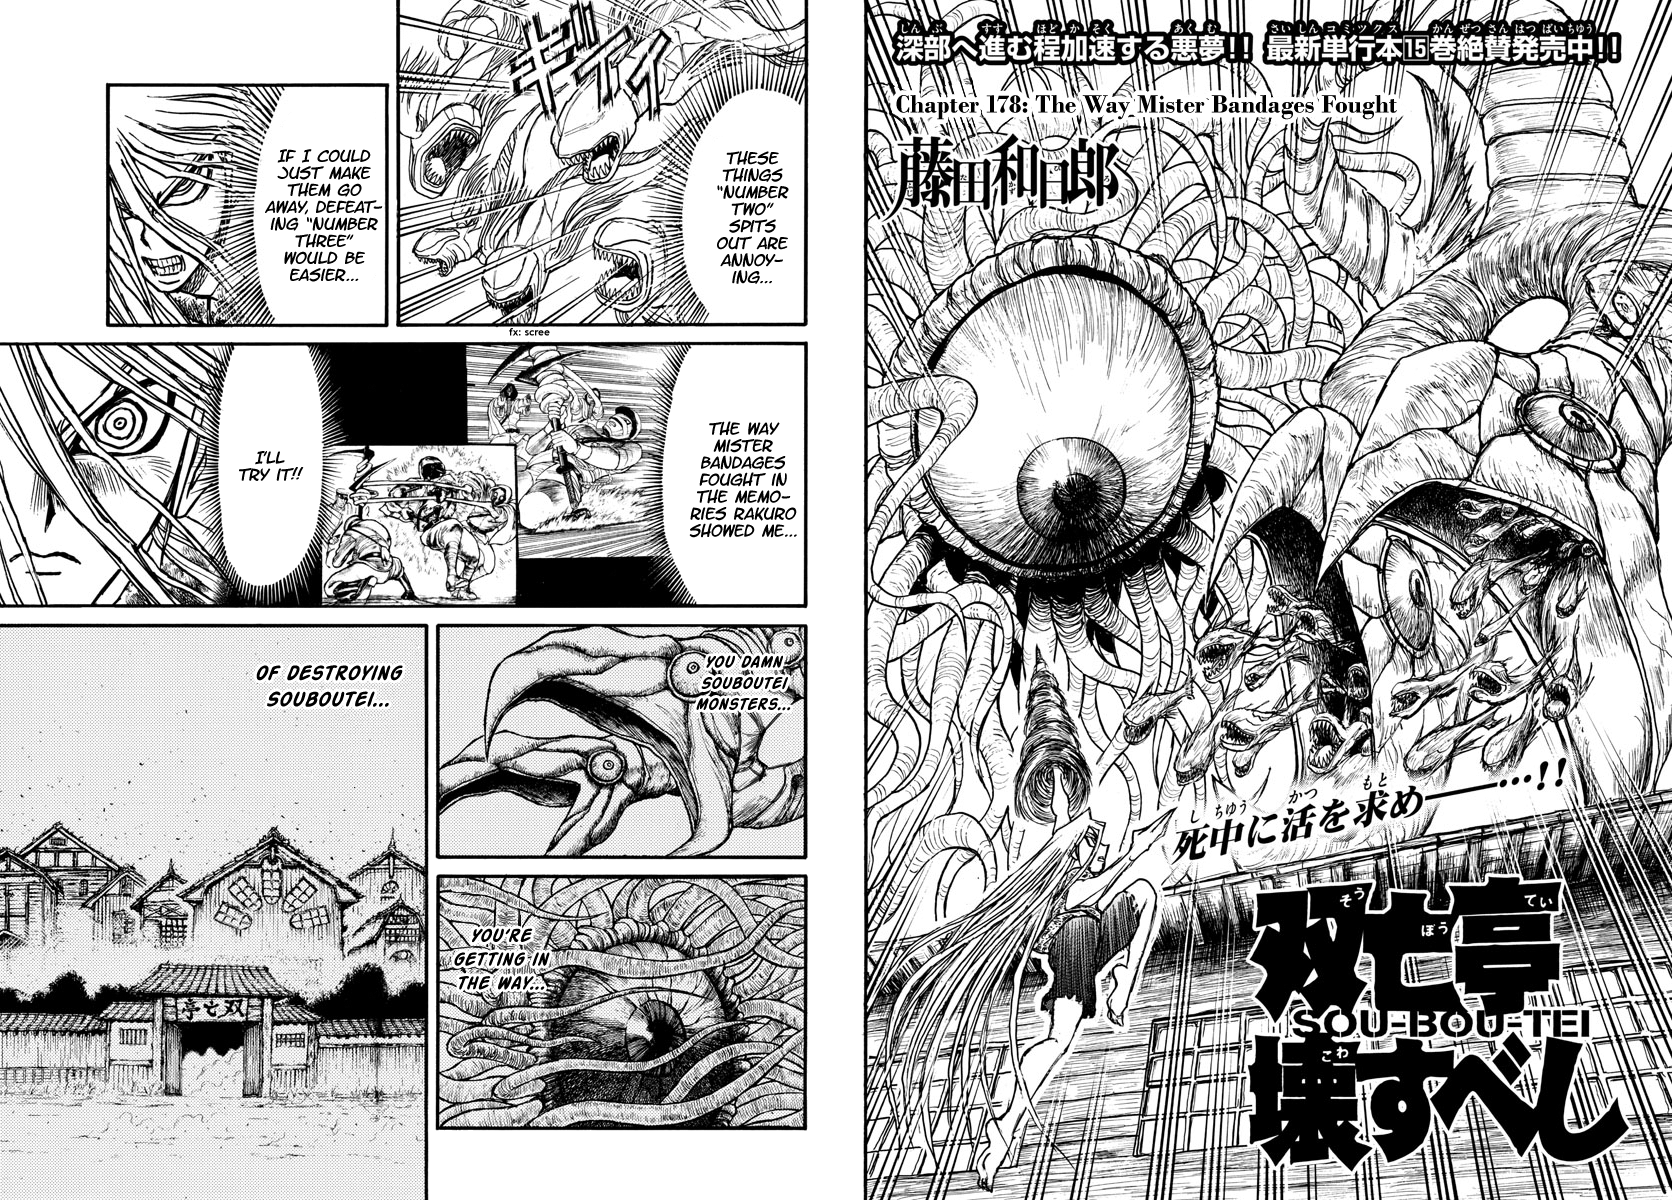 Souboutei Must Be Destroyed Vol.18 Chapter 178: The Way Mister Bandages Fought - Picture 2